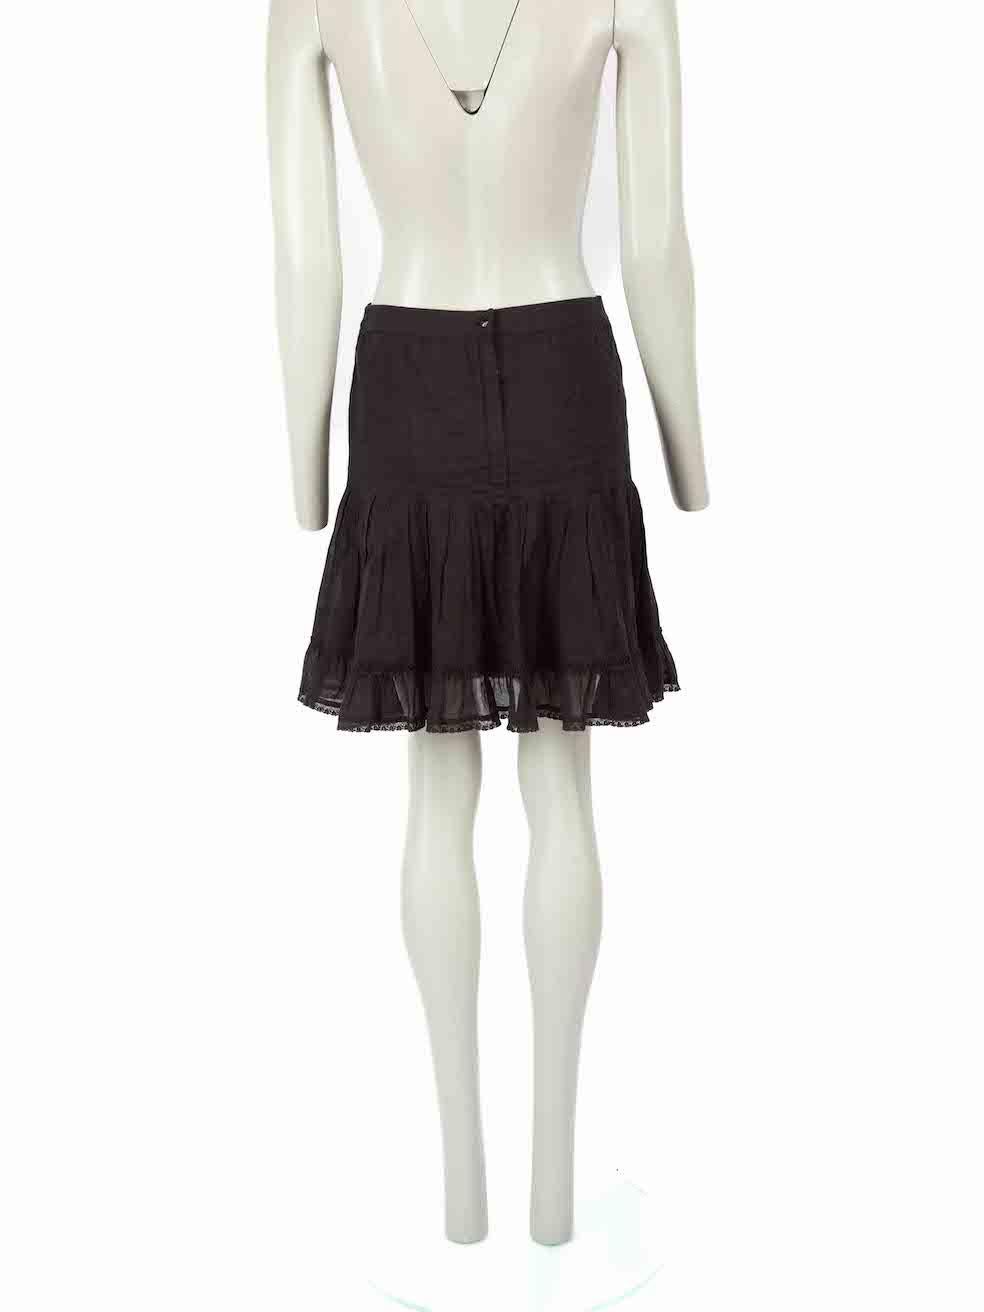 Isabel Marant Isabel Marant Étoile Black Lace Trim Mini Pleated Skirt Size M In Good Condition For Sale In London, GB